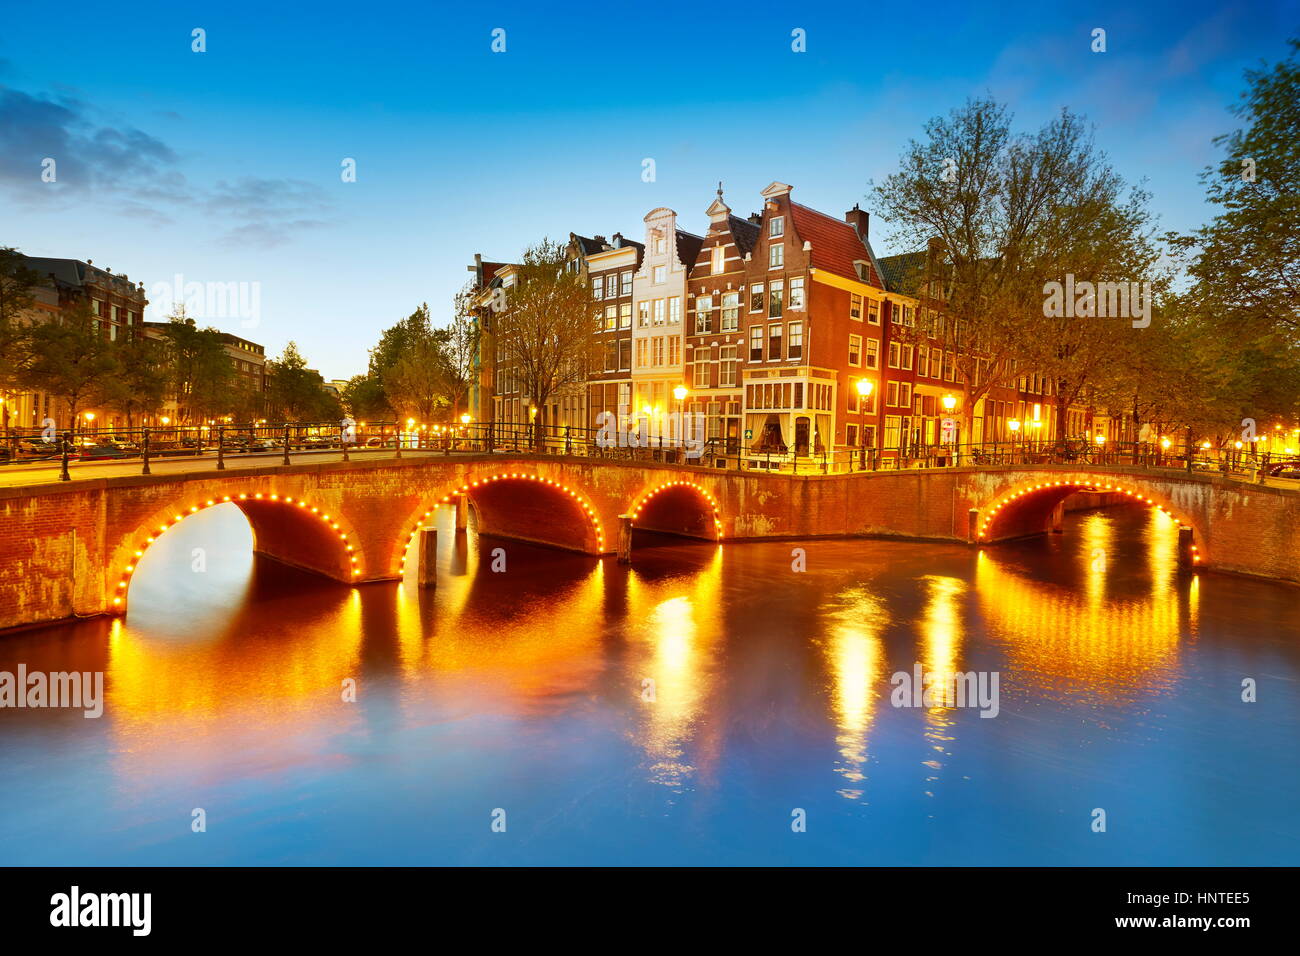 Evening at Amsterdam canals - Holland, Netherlands Stock Photo